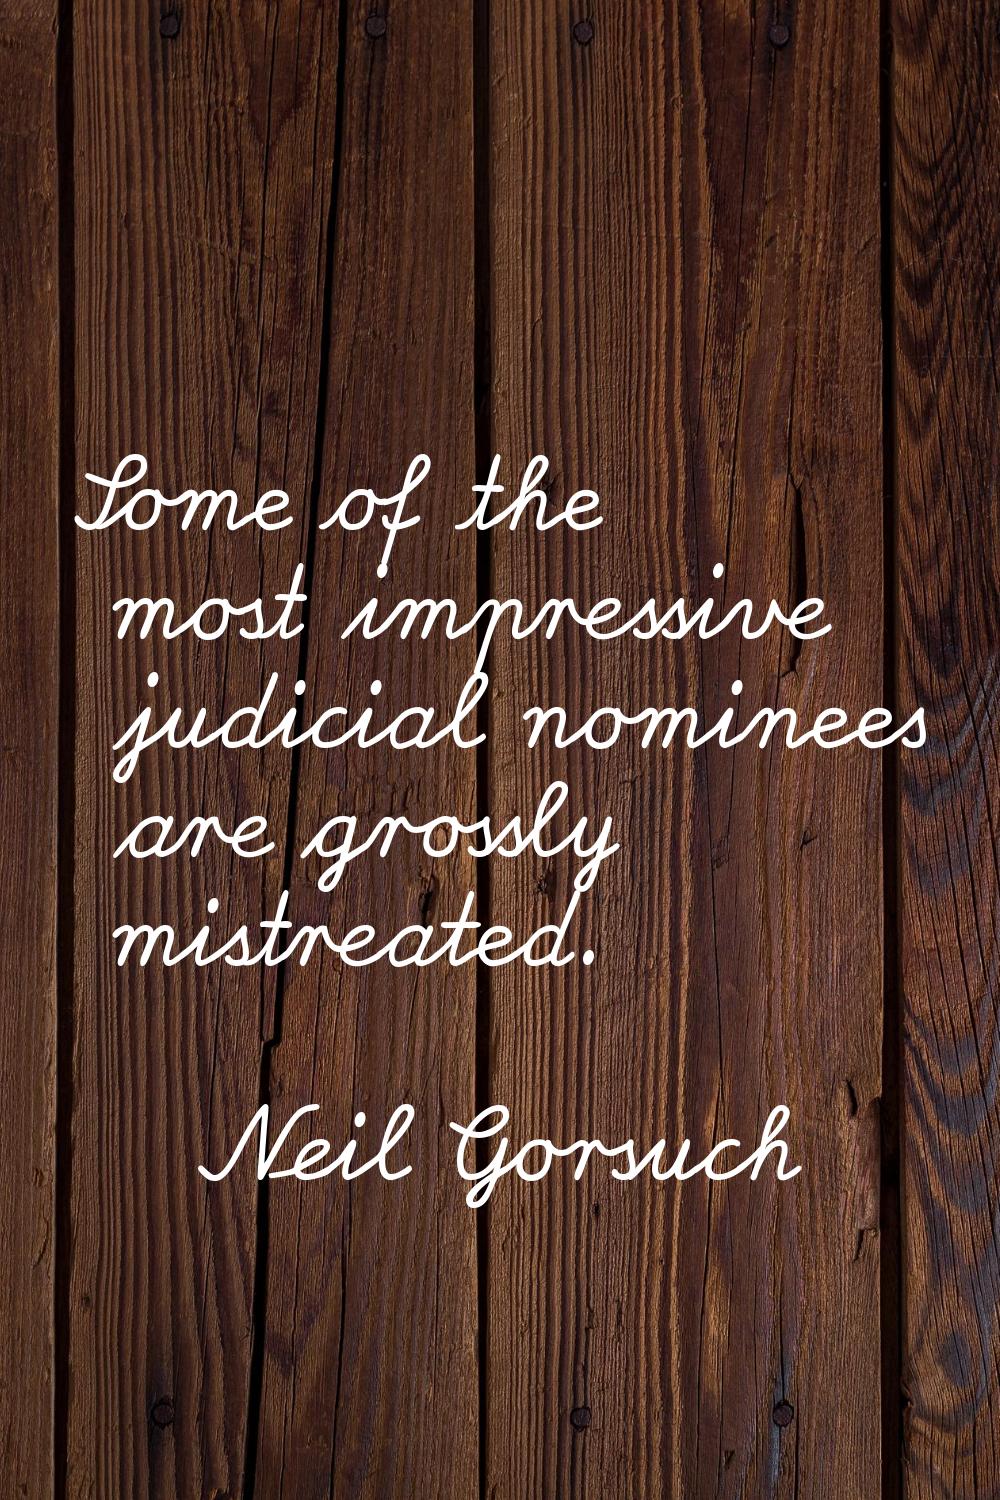 Some of the most impressive judicial nominees are grossly mistreated.